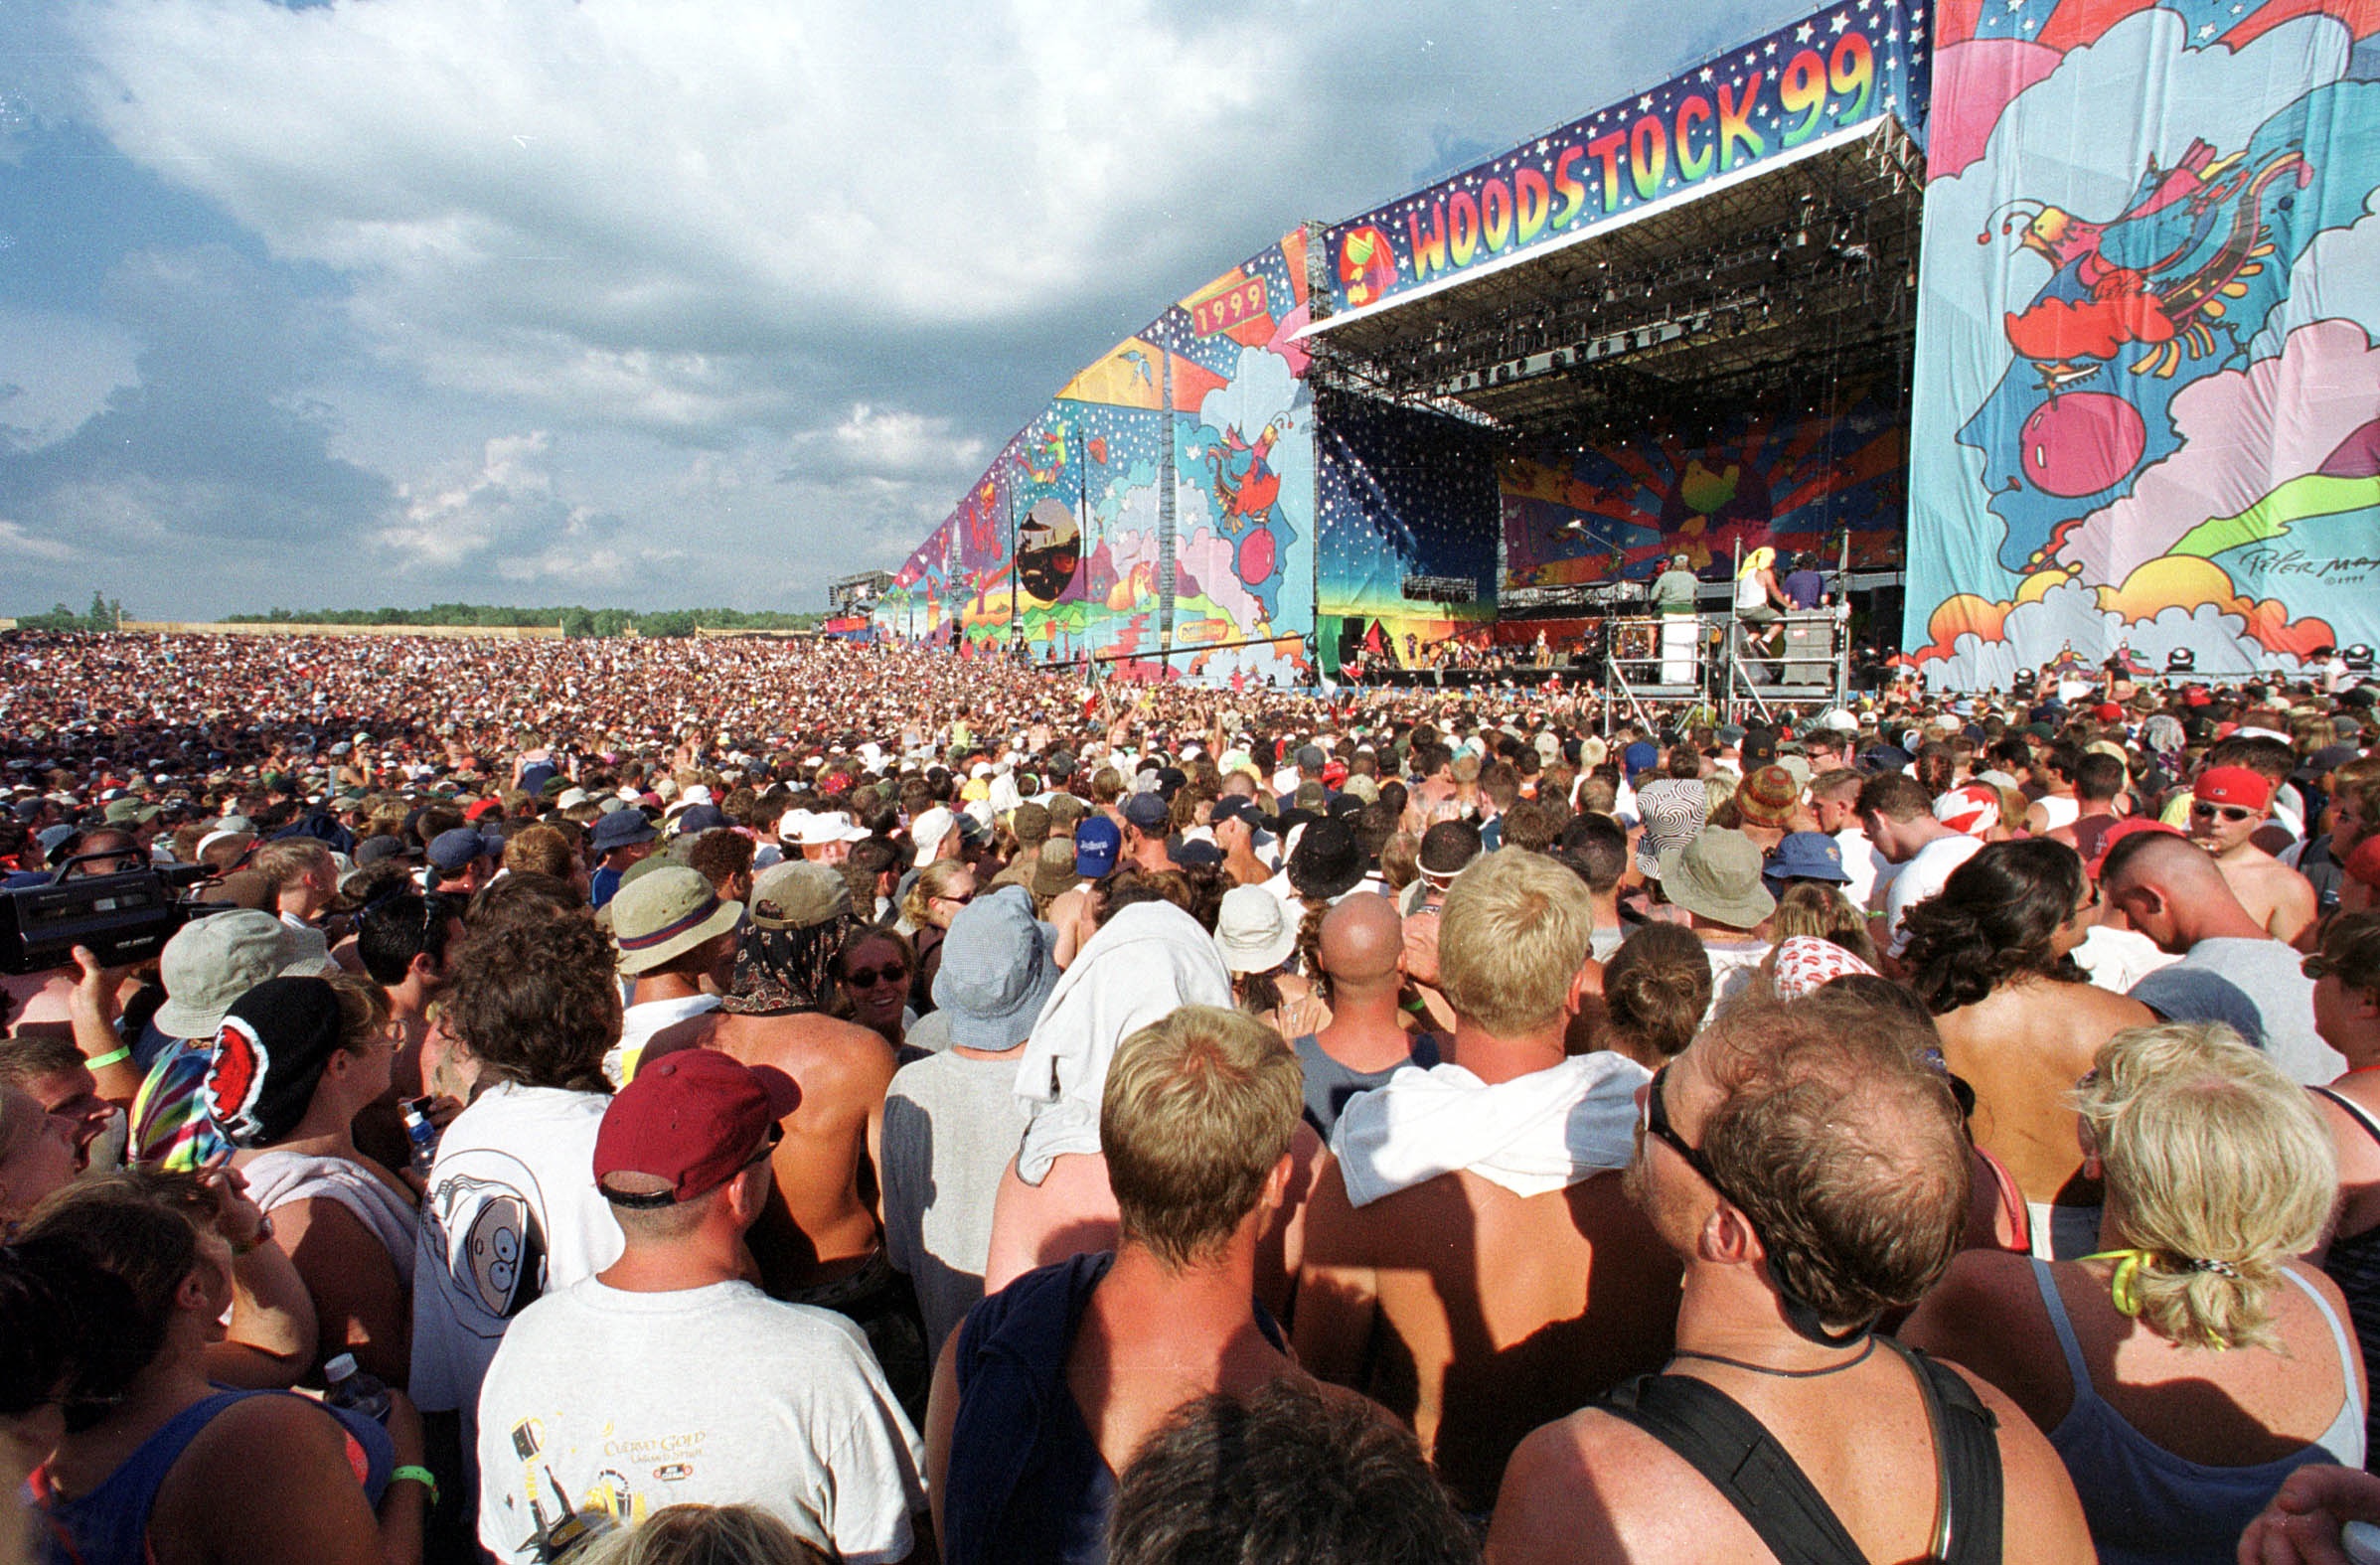 Woodstock 99 Spins Live Report From the Music Festival pic